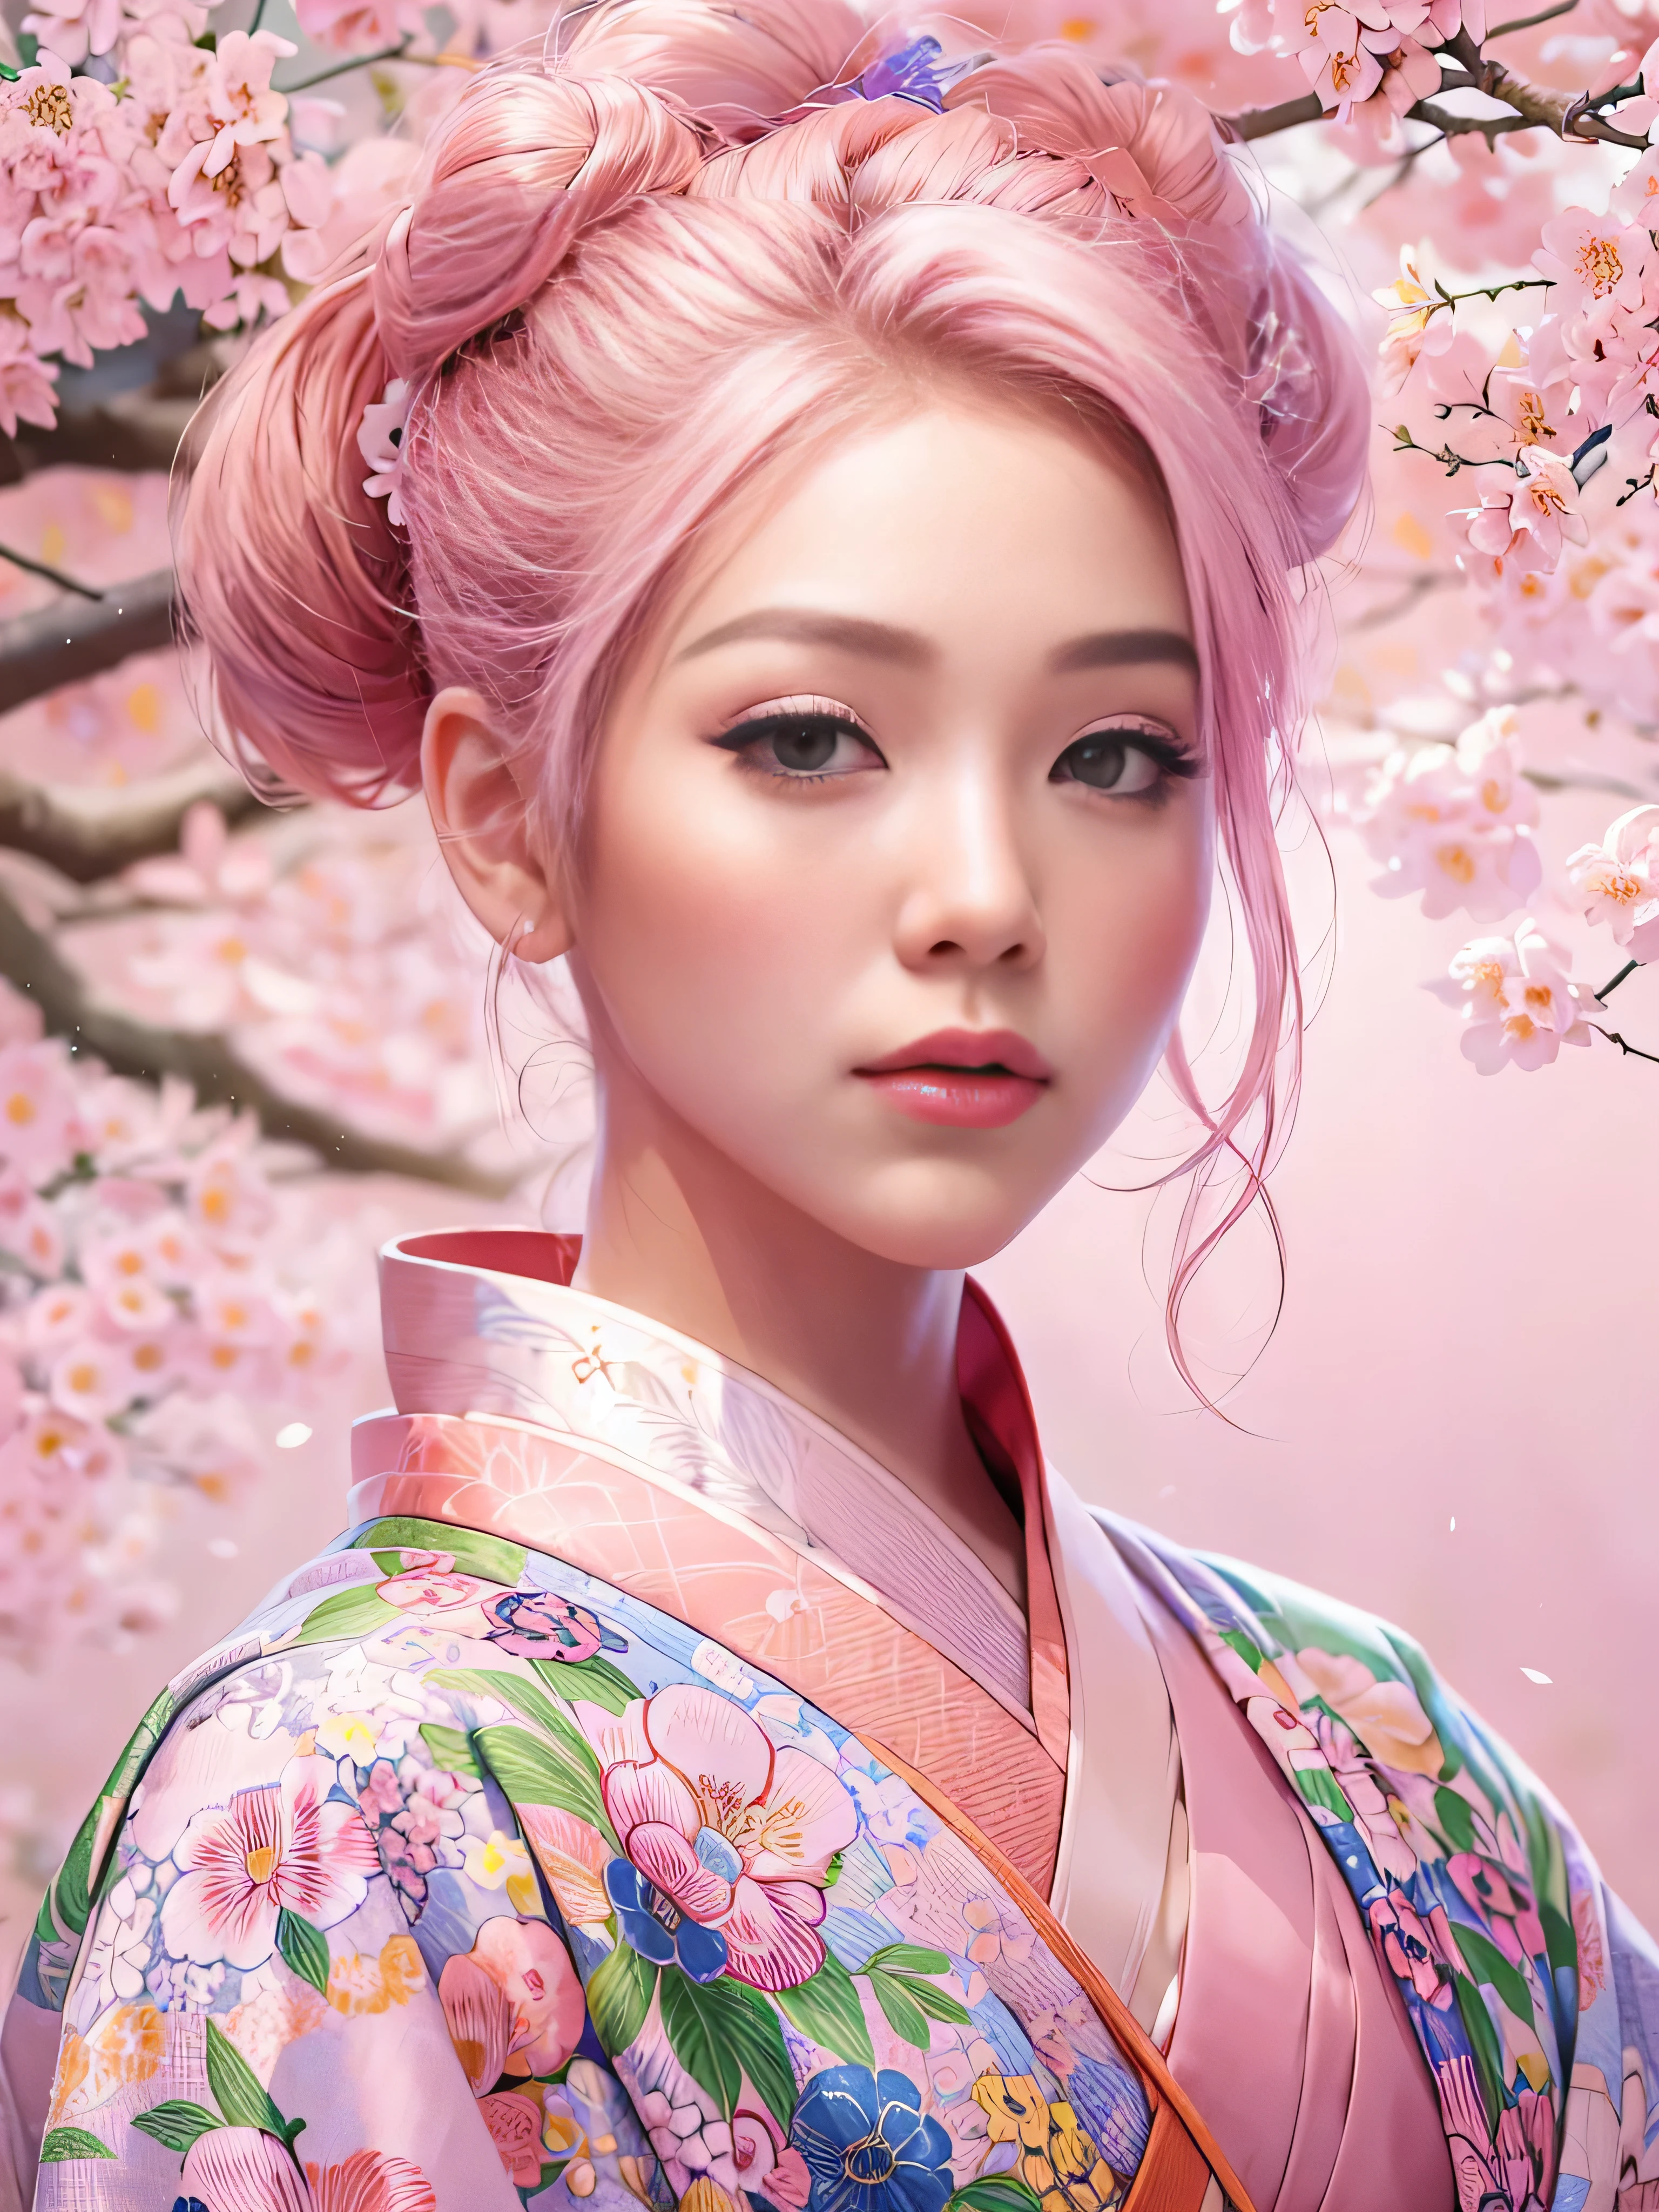 A hyper-realistic, highly detailed, and high-resolution 16k image of a young, beautiful female with engfa face. she has top bun pink hair and translucent skin, and  dressed in a traditional pink Japanese kimono with a small flower design. The image captures the ethereal beauty and mystique of the spirit world. The style  inspired by the delicate, soft aesthetic found in traditional Japanese art. The background was full of pink sakura tree.